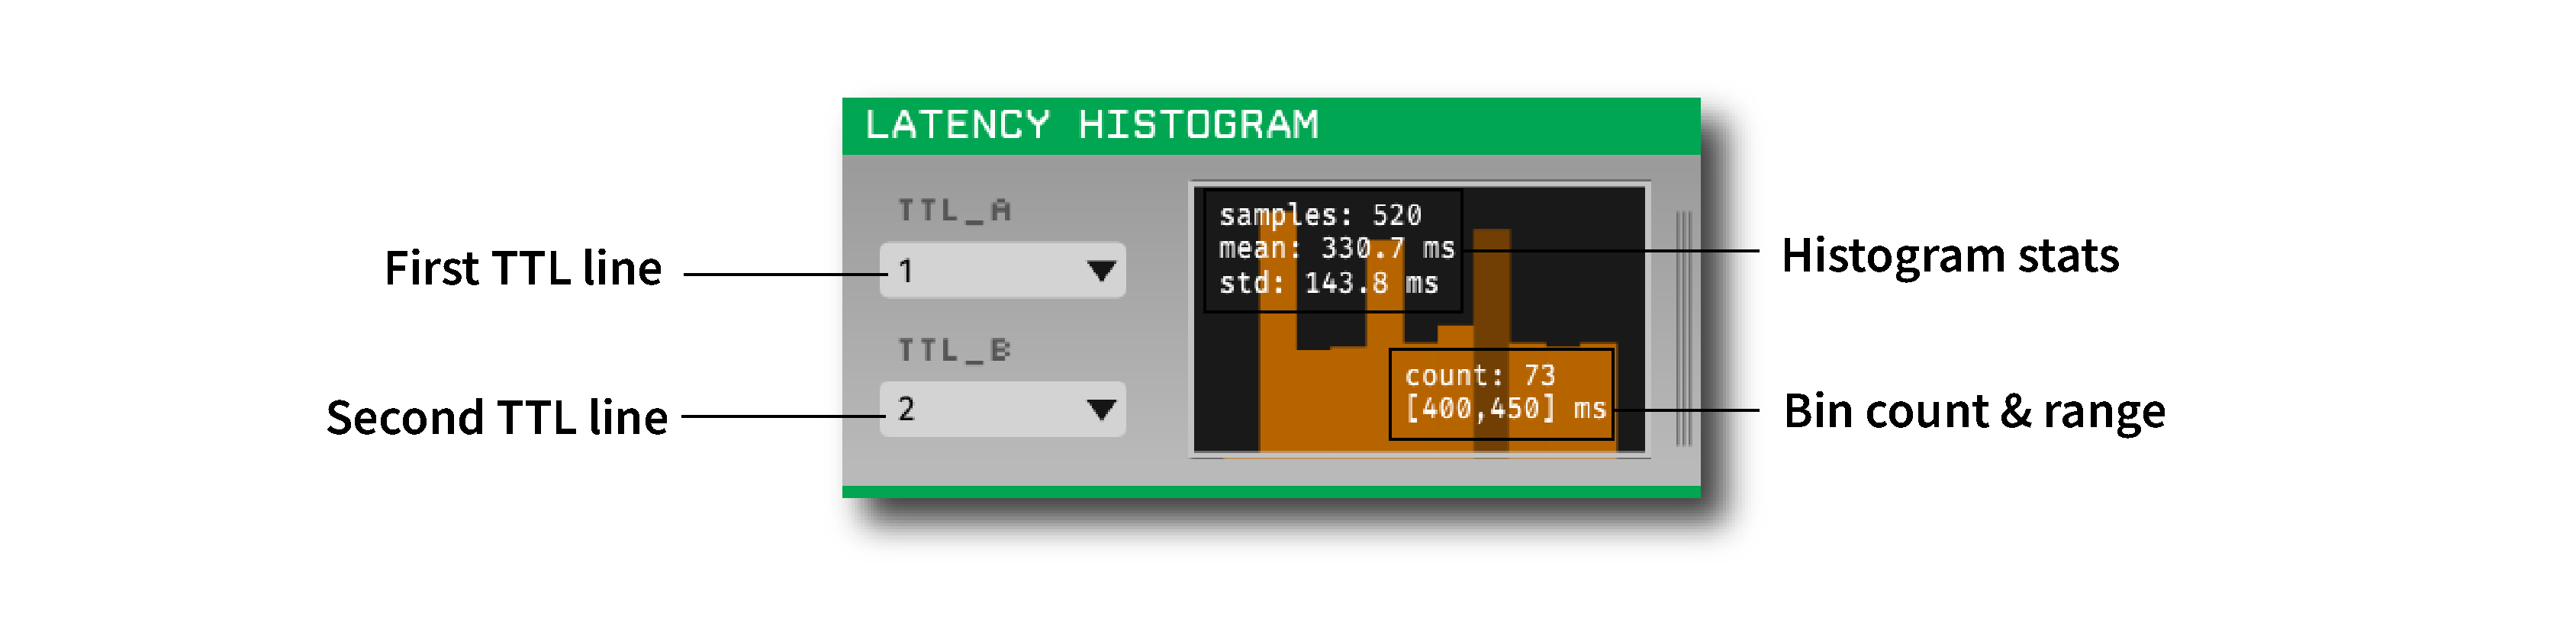 Annotated Latency Histogram interface